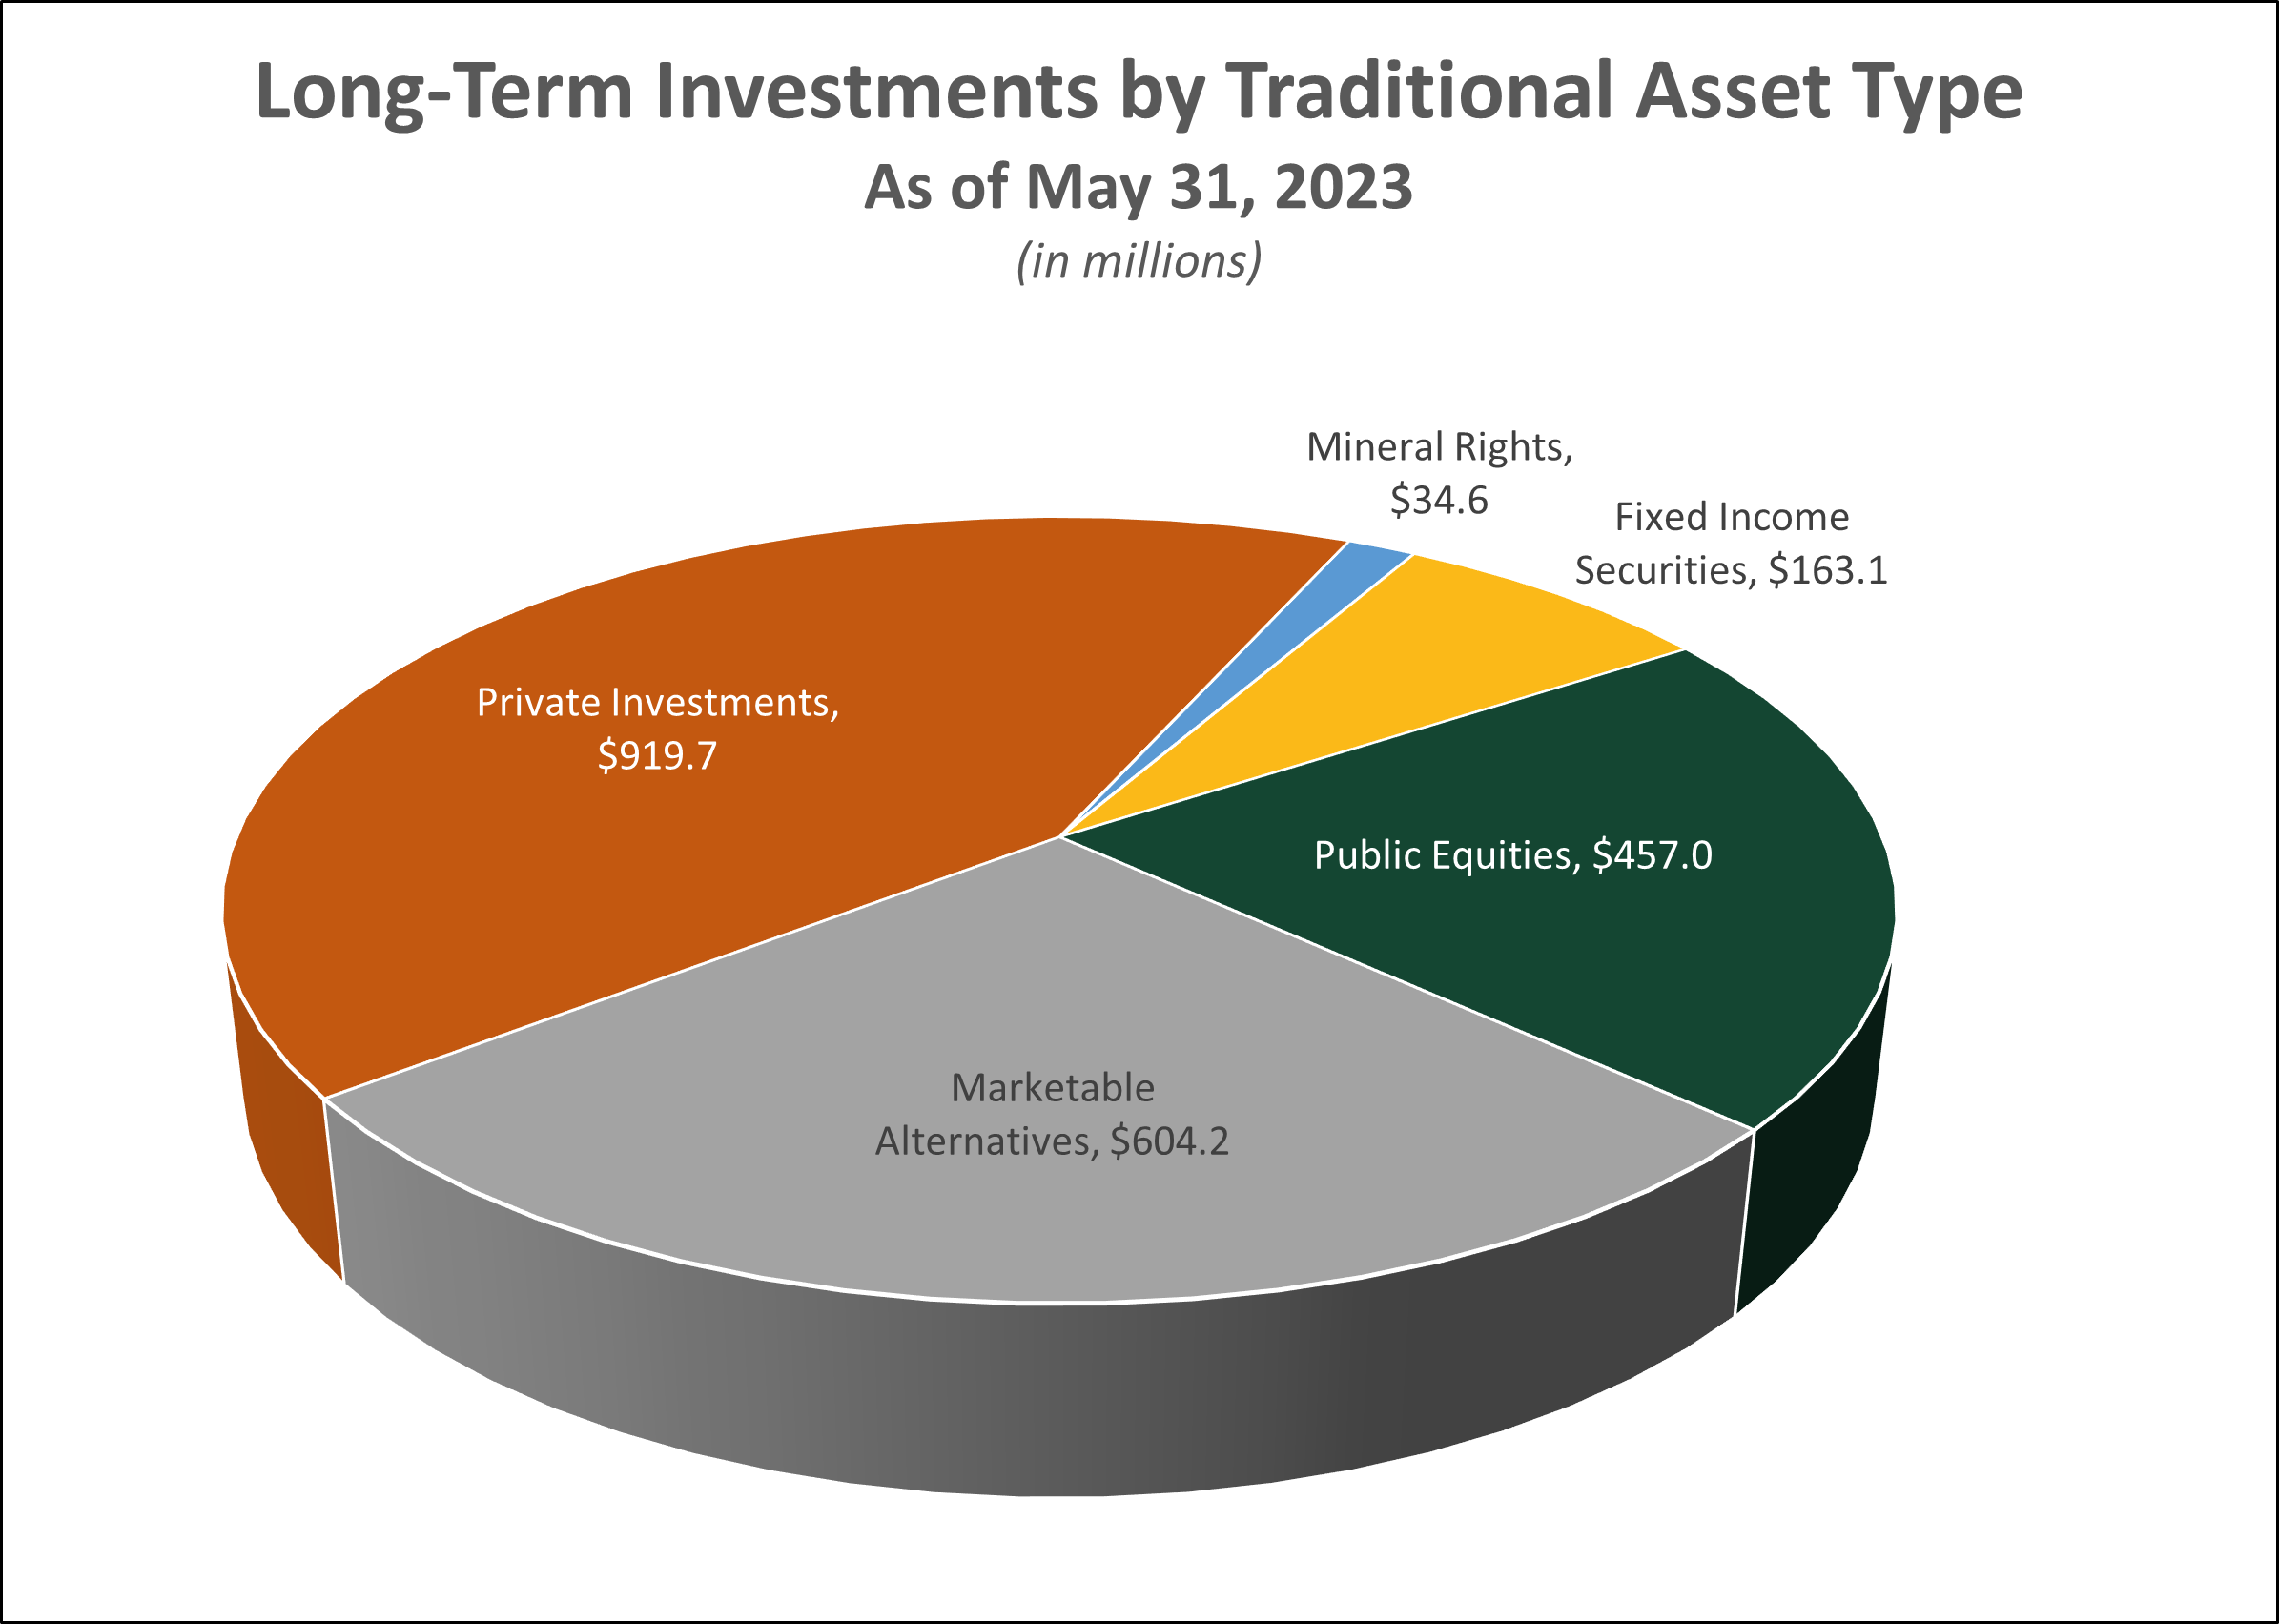 Long-Term Investments by Traditional Asset Type As of May 31, 2023